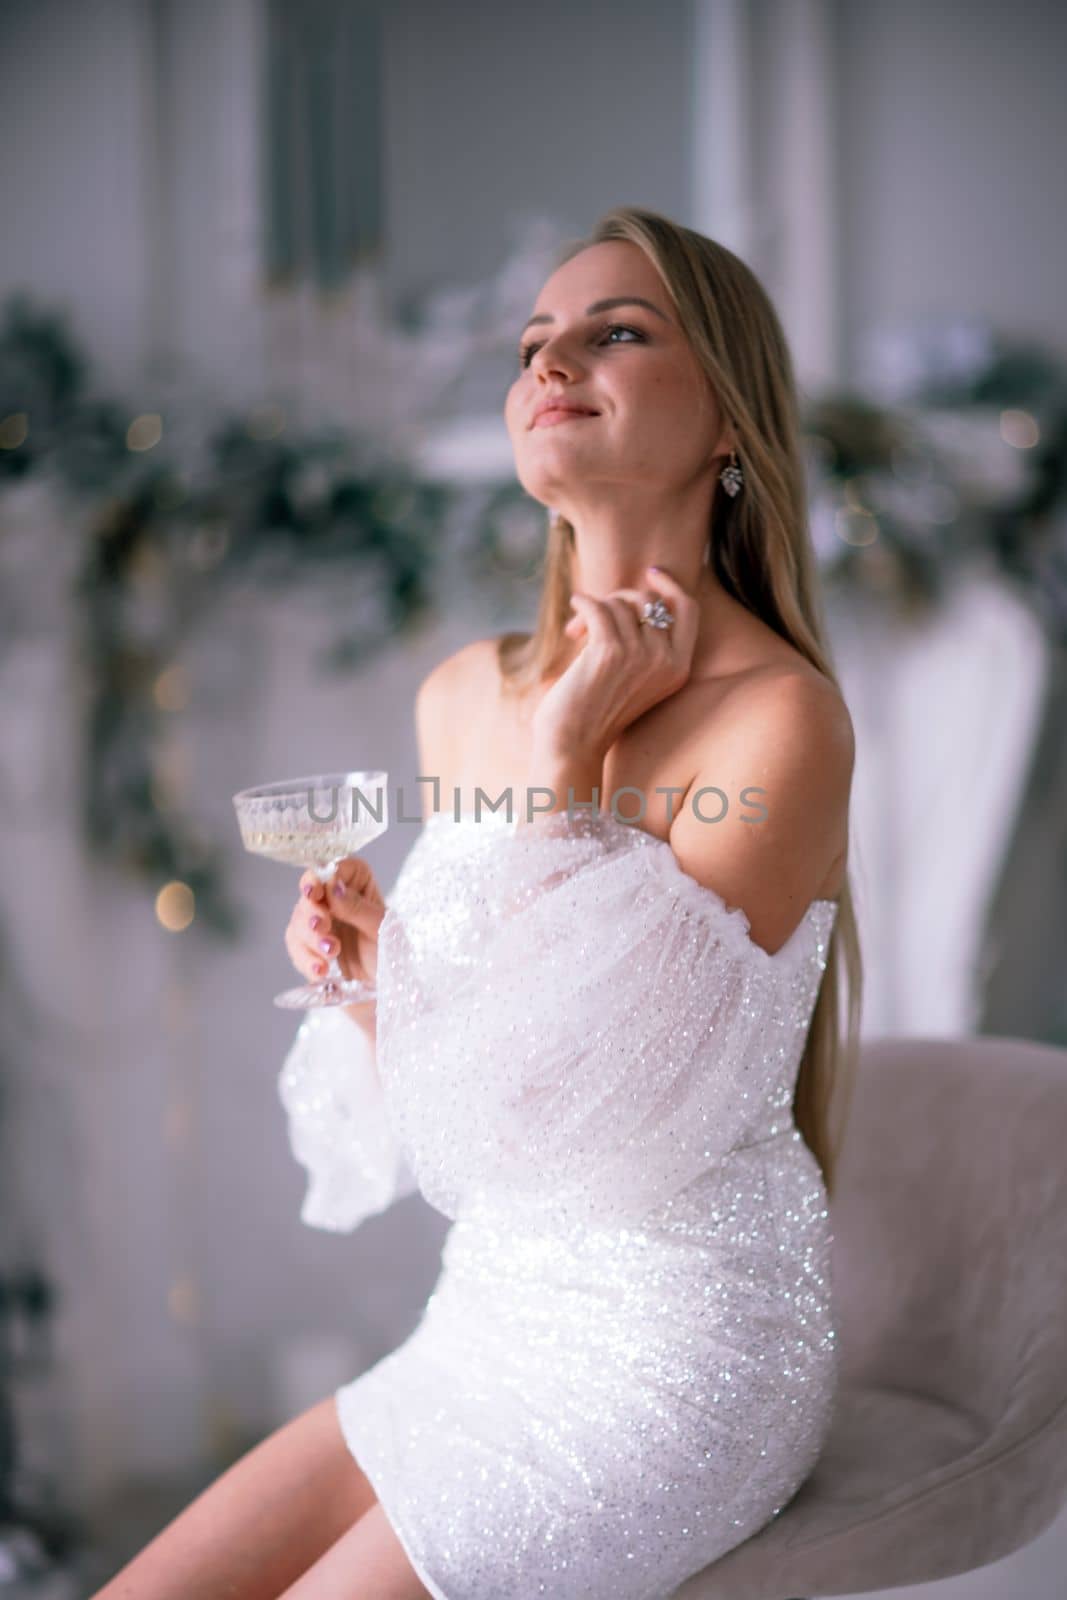 The blonde in the Christmas room. A beautiful blonde woman in a shiny light short dress with a train stands in a beautiful bright room decorated with a festive interior with a Christmas tree